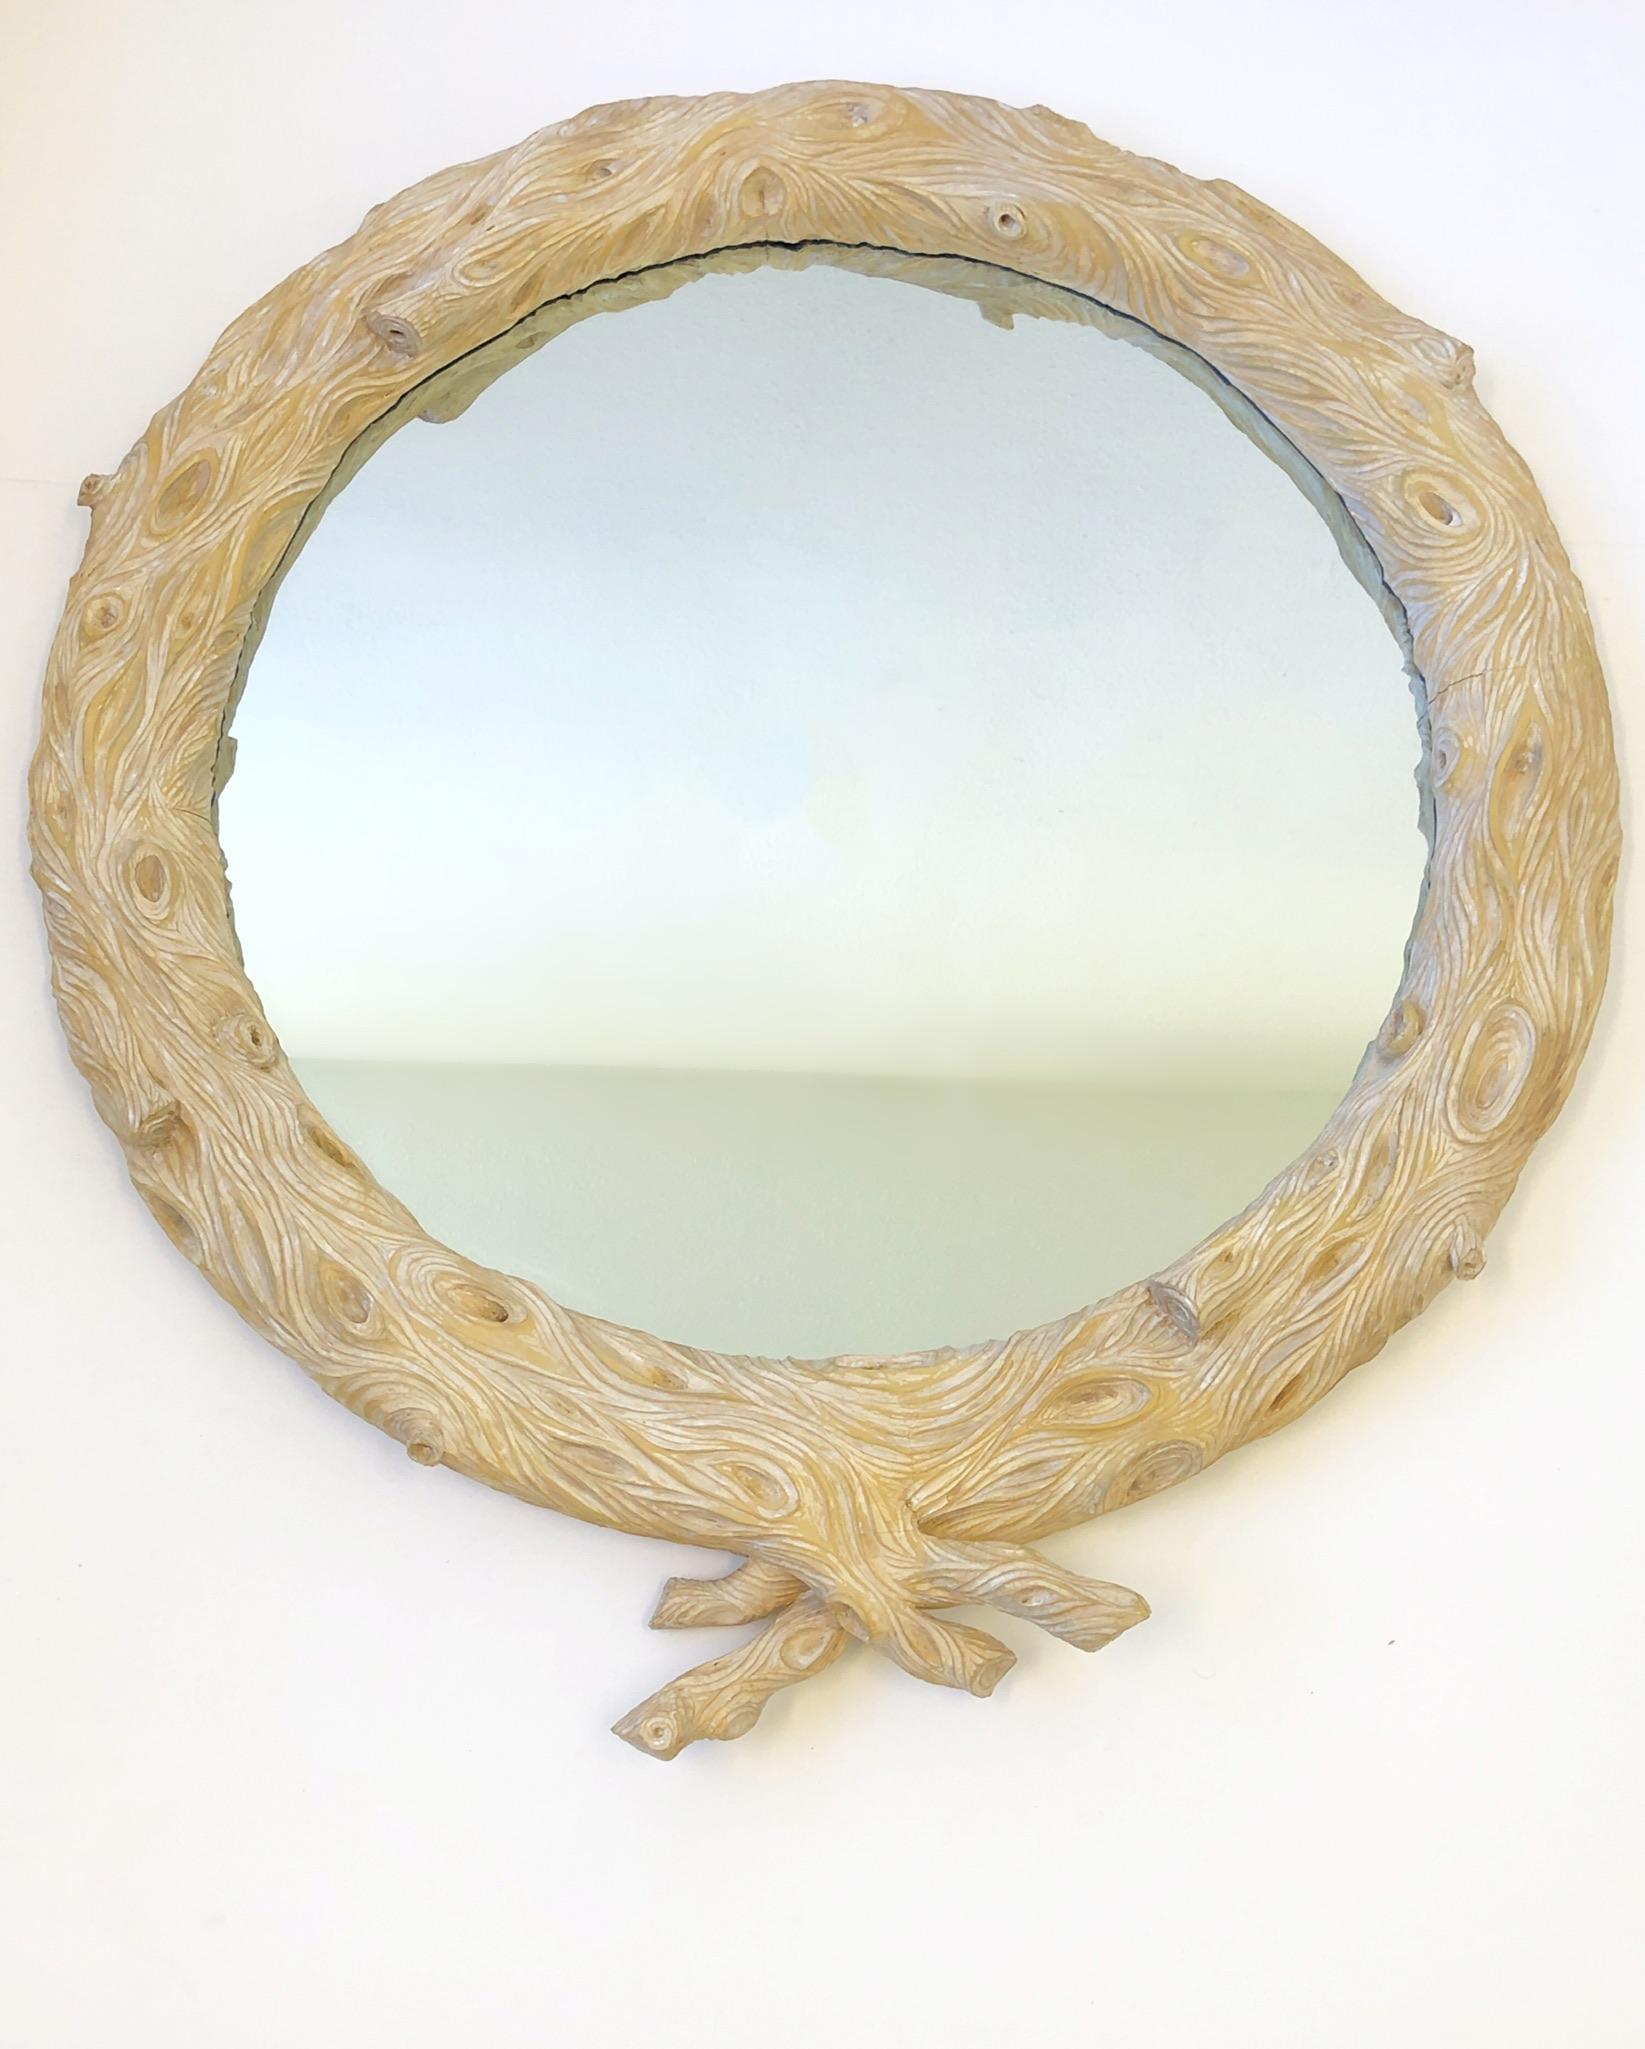 1970s Italian hand carved wood with a white washed finish, faux Bois frame mirror in the manner of Bartolozzi e Mailoli. In original condition minor wear consistent with age. 
Measurements: 5.5” deep, 48” wide and 54” high with crown.